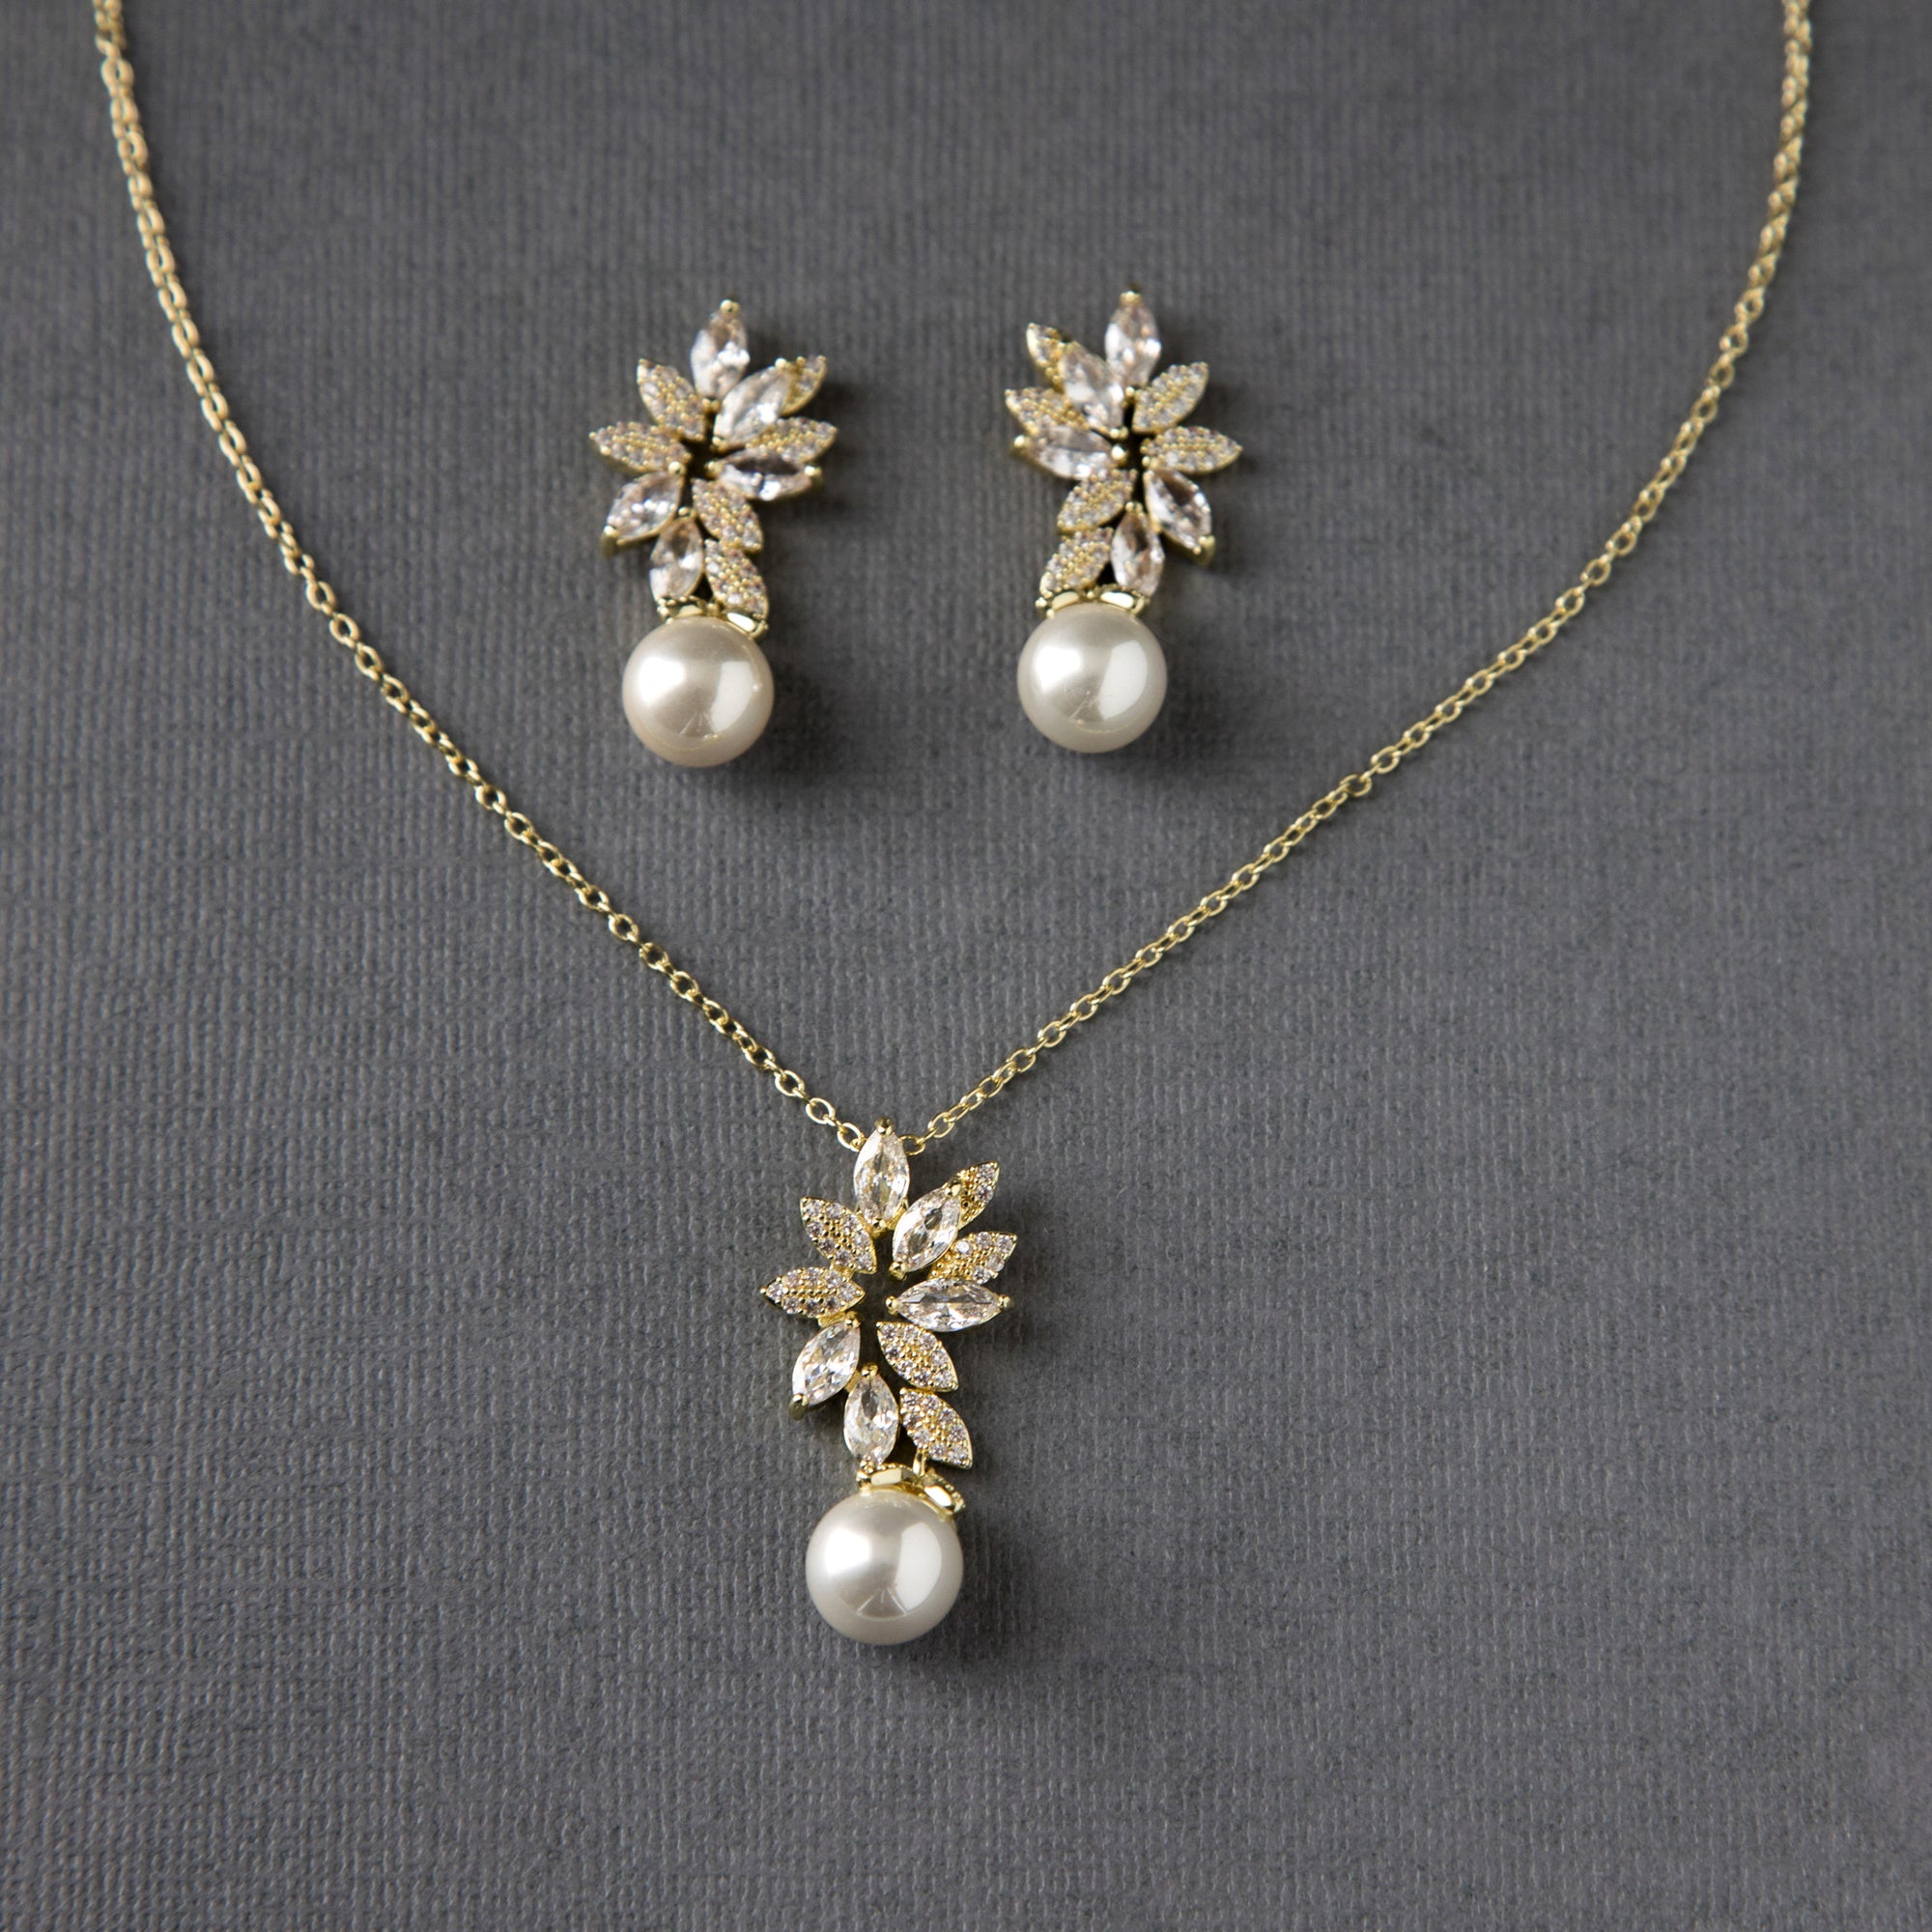 Pearl Pendant Necklace and Earrings Set with CZ Jewels